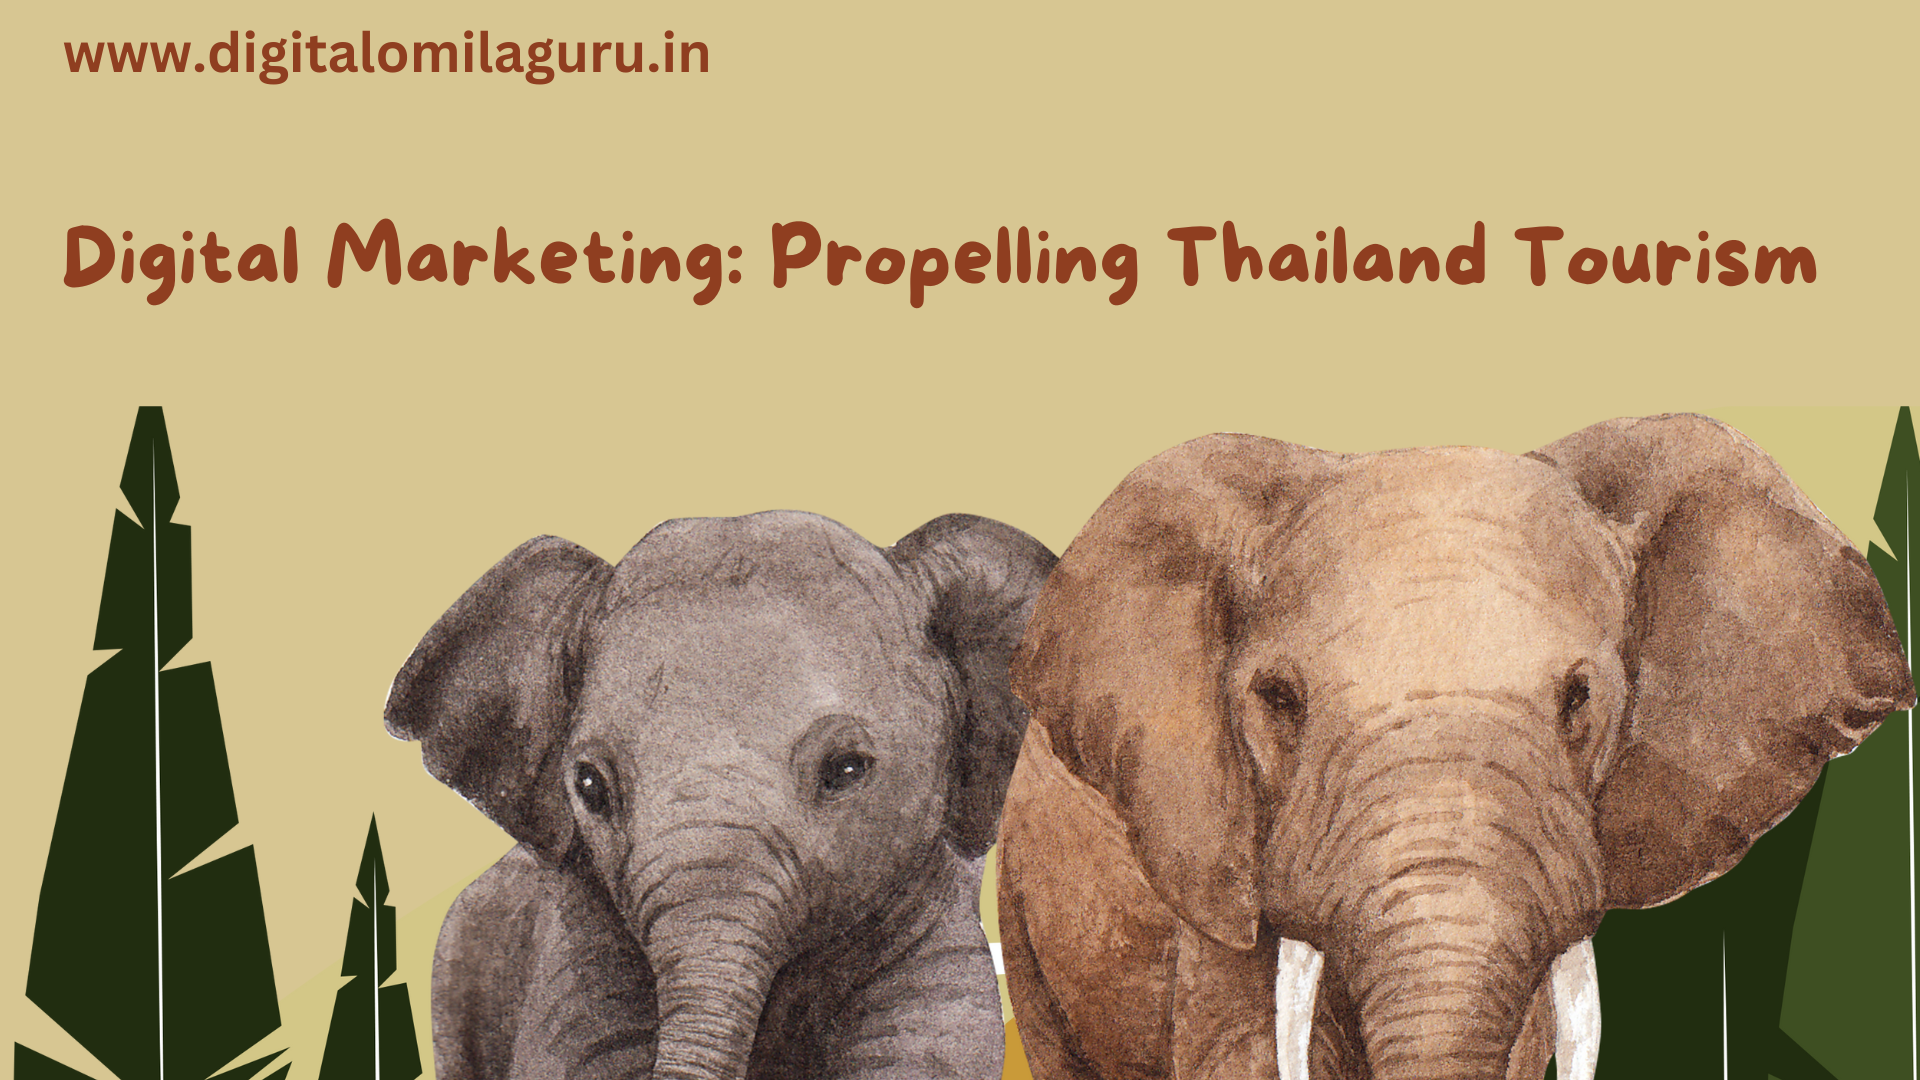 Digital Marketing: Propelling Thailand Tourism to New Heights in India